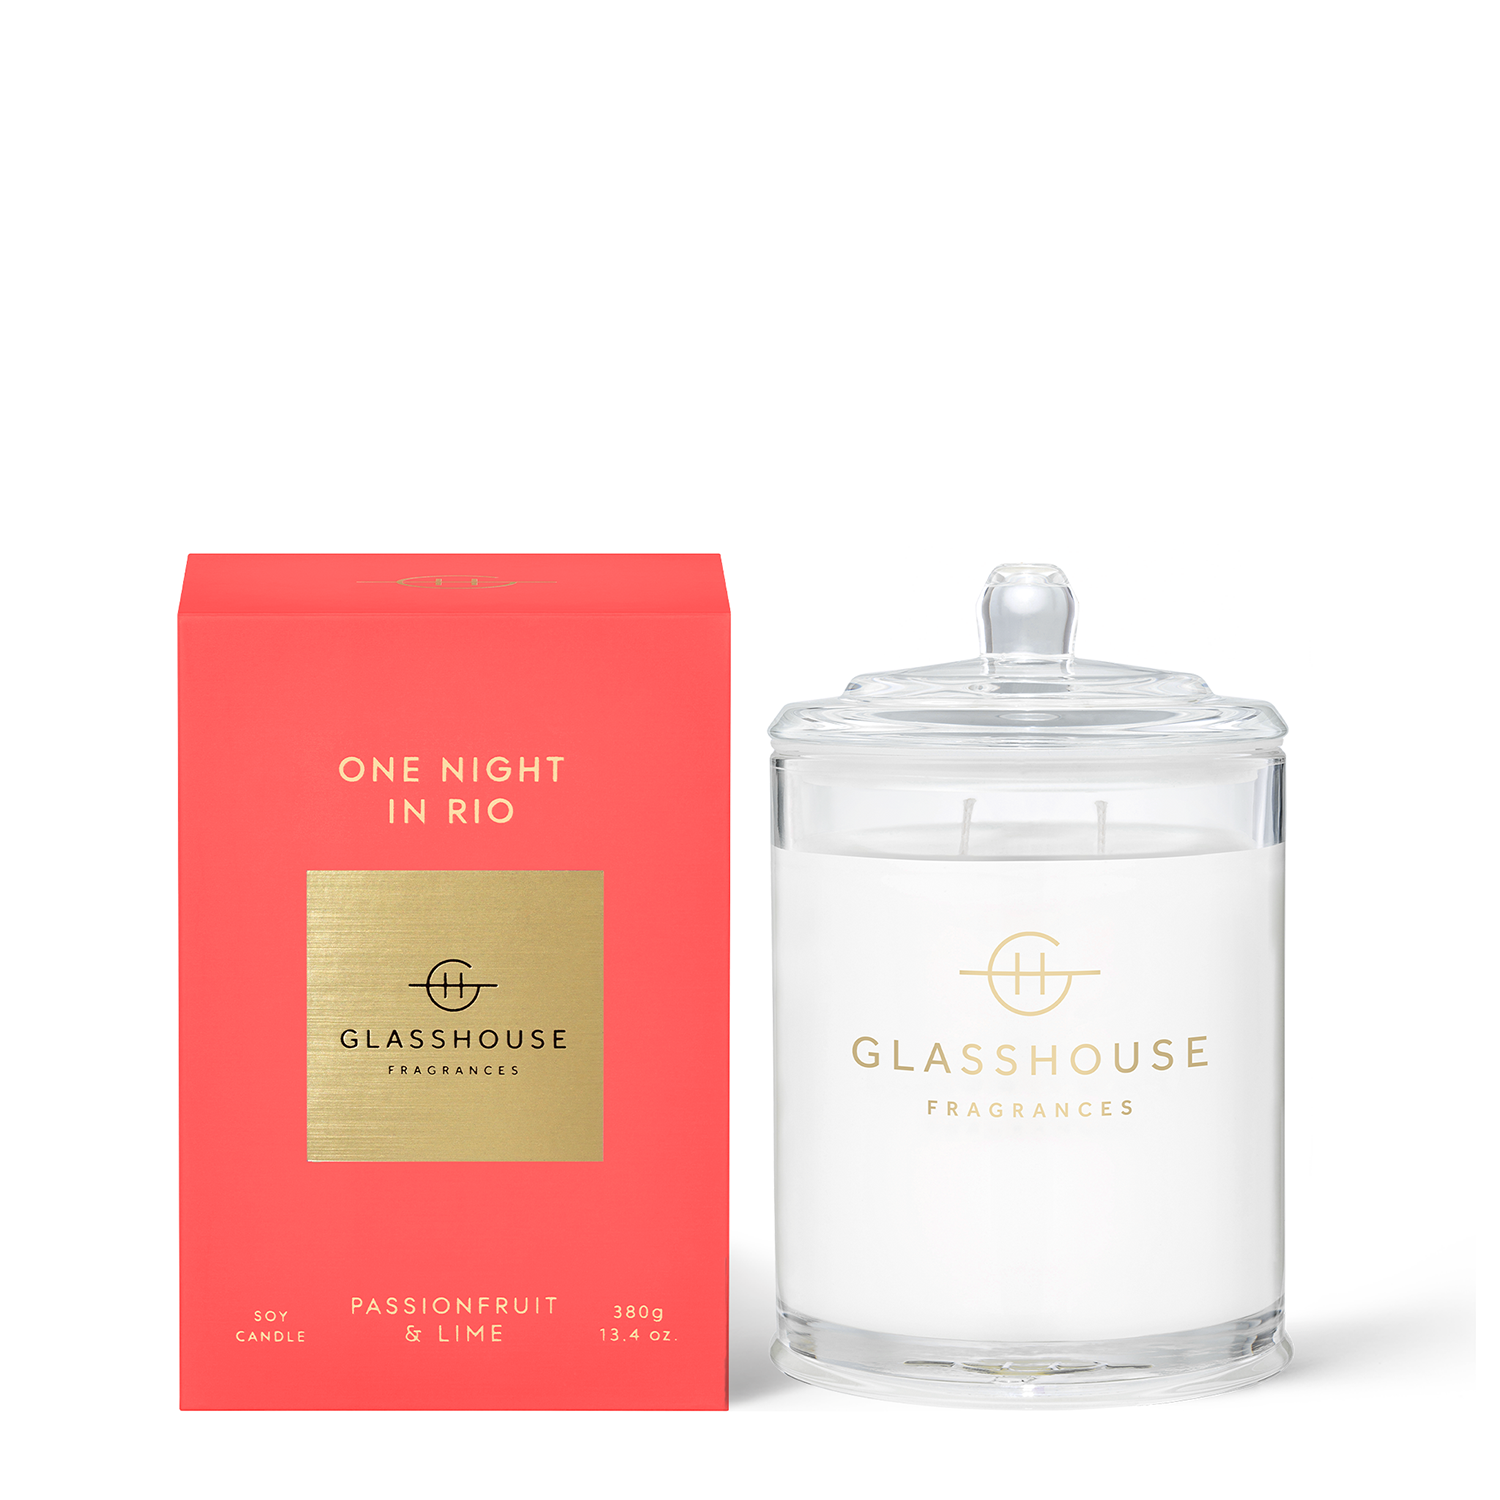 Glasshouse Fragrances - One Night in Rio Candle / 13 oz